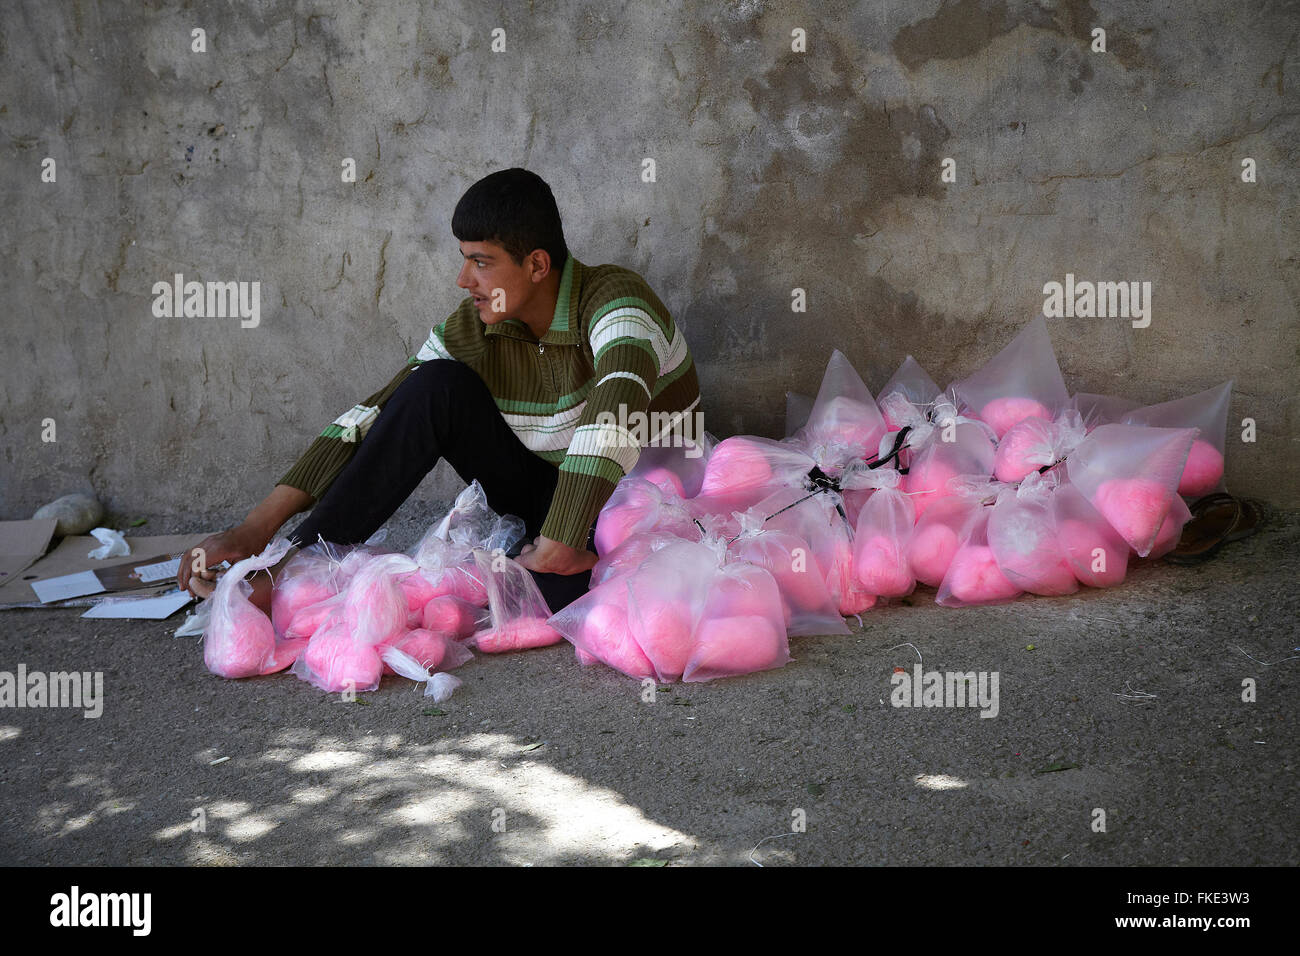 A young refugee boy selling colored candy-floss inside the holy Yazidi temple in Lalesh. Iraqi Kurdistan Stock Photo